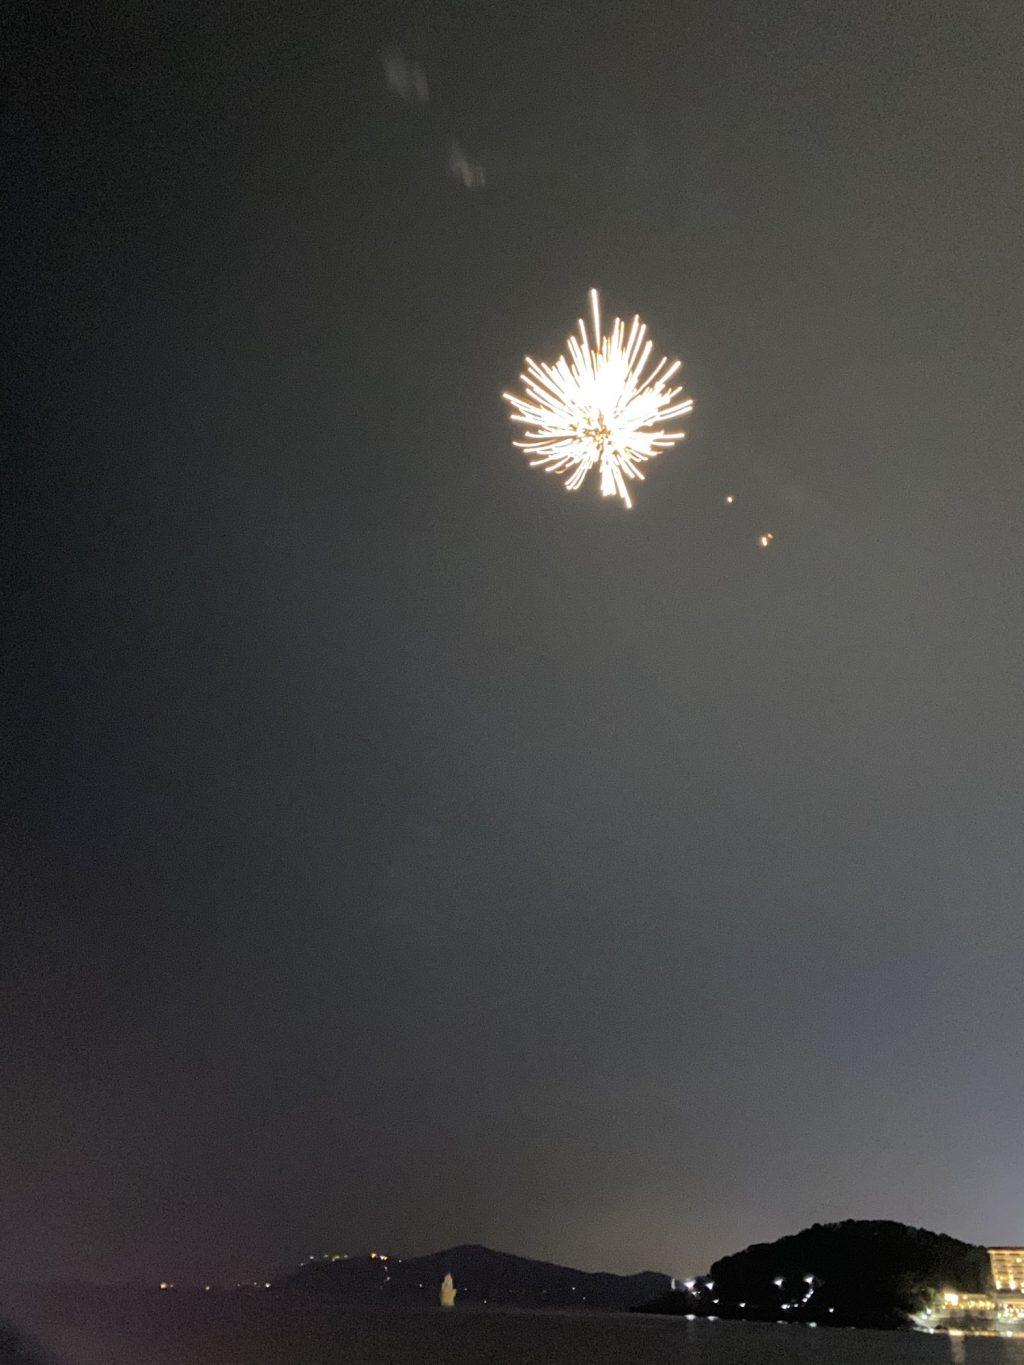 A firework lights up the night sky at Haeundae Beach on Oct. 3. Two firework sticks cost $5 USD, and each stick lit up around 30 small fireworks in the sky.